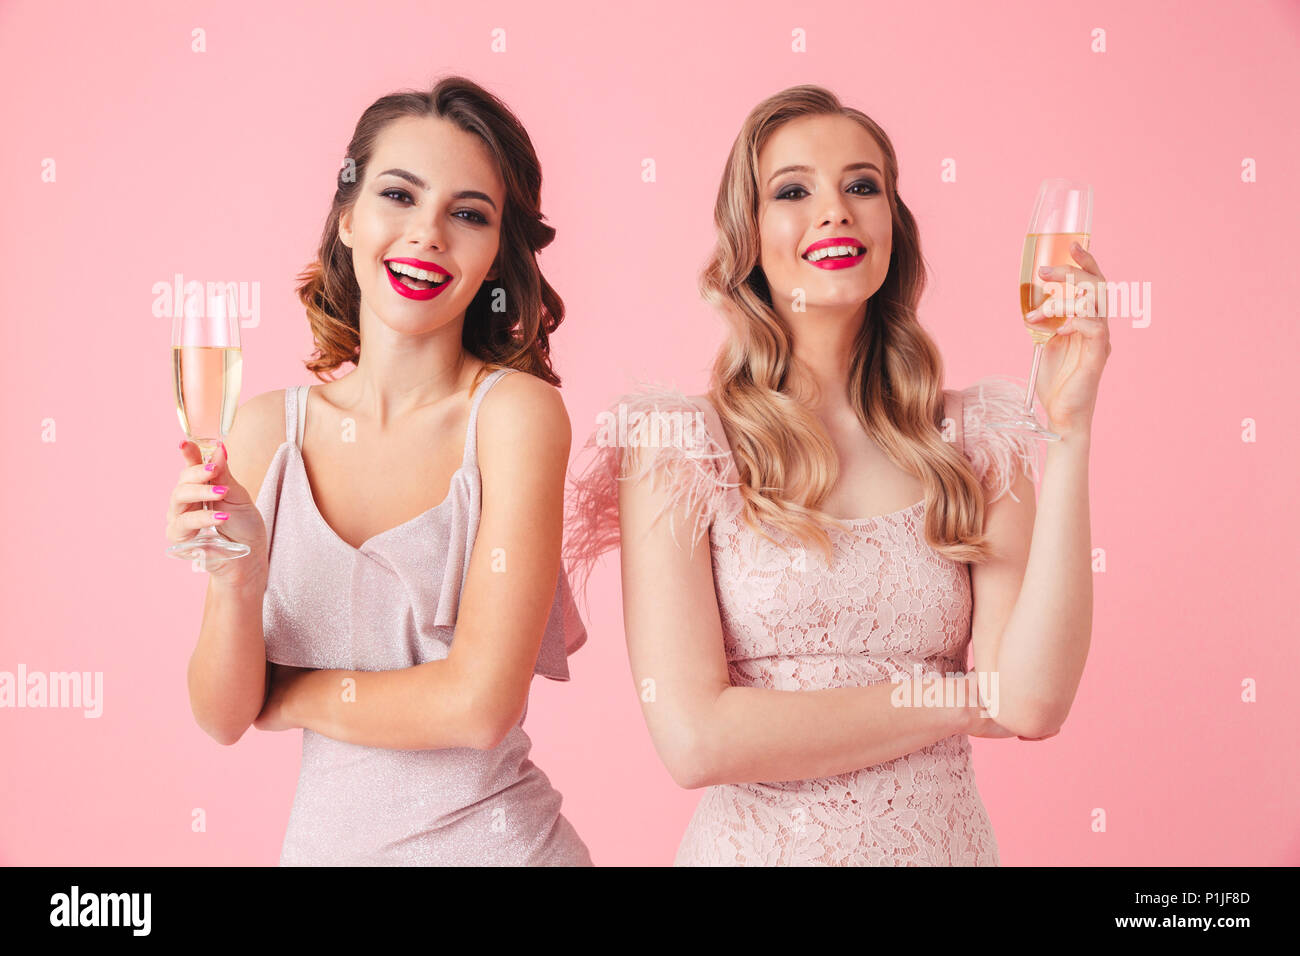 Two Happy elegant women in dresses posing together with champagne and looking at the camera over pink background Stock Photo